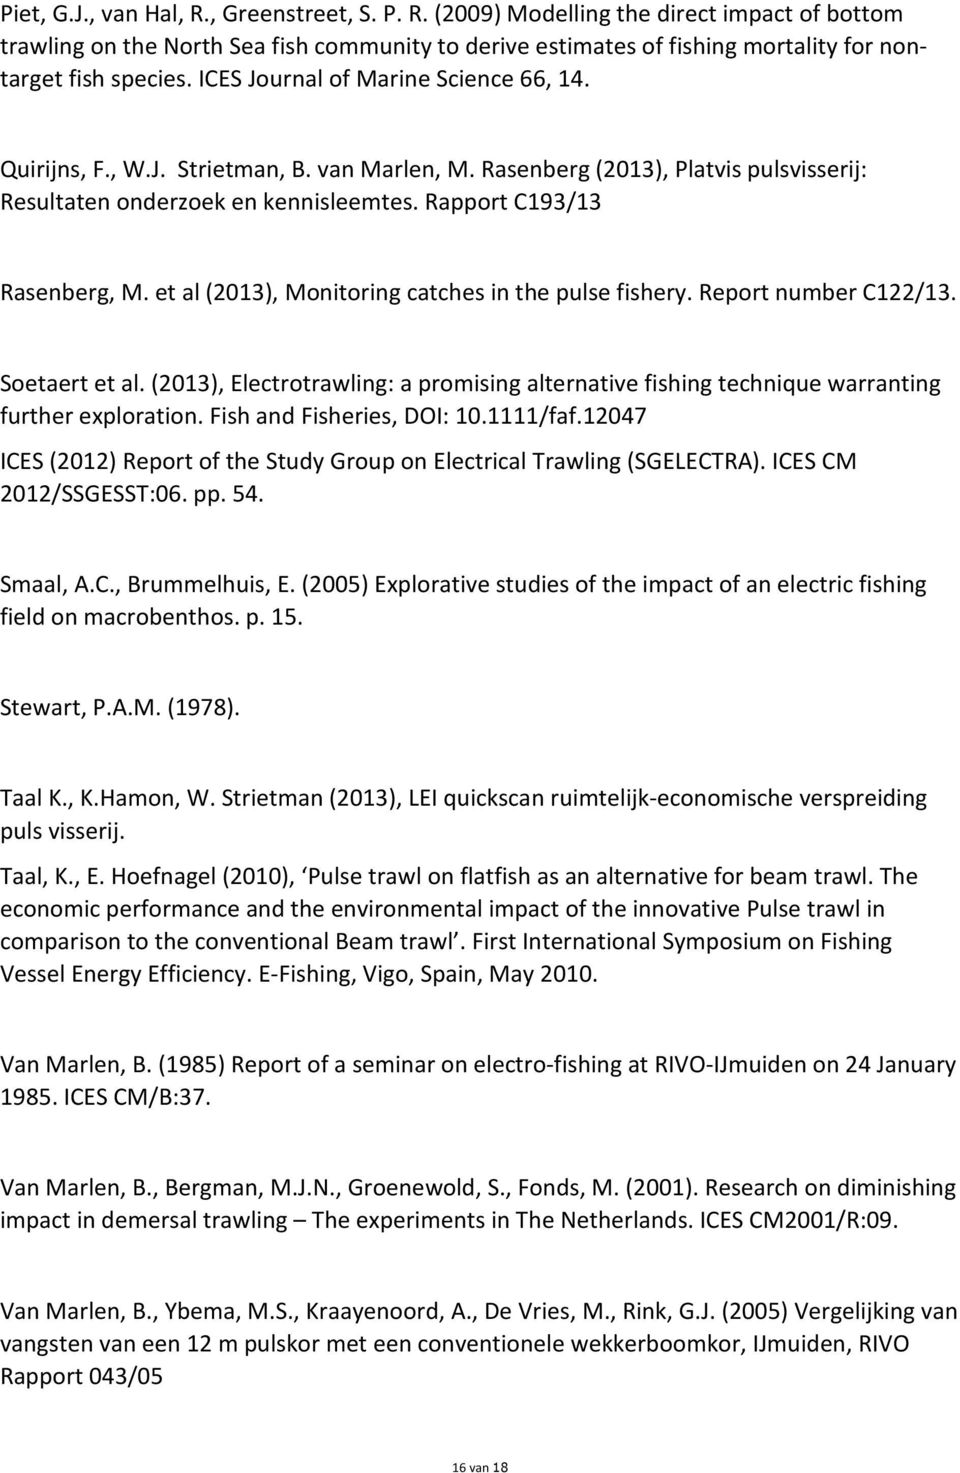 et al (2013), Monitoring catches in the pulse fishery. Report number C122/13. Soetaert et al. (2013), Electrotrawling: a promising alternative fishing technique warranting further exploration.